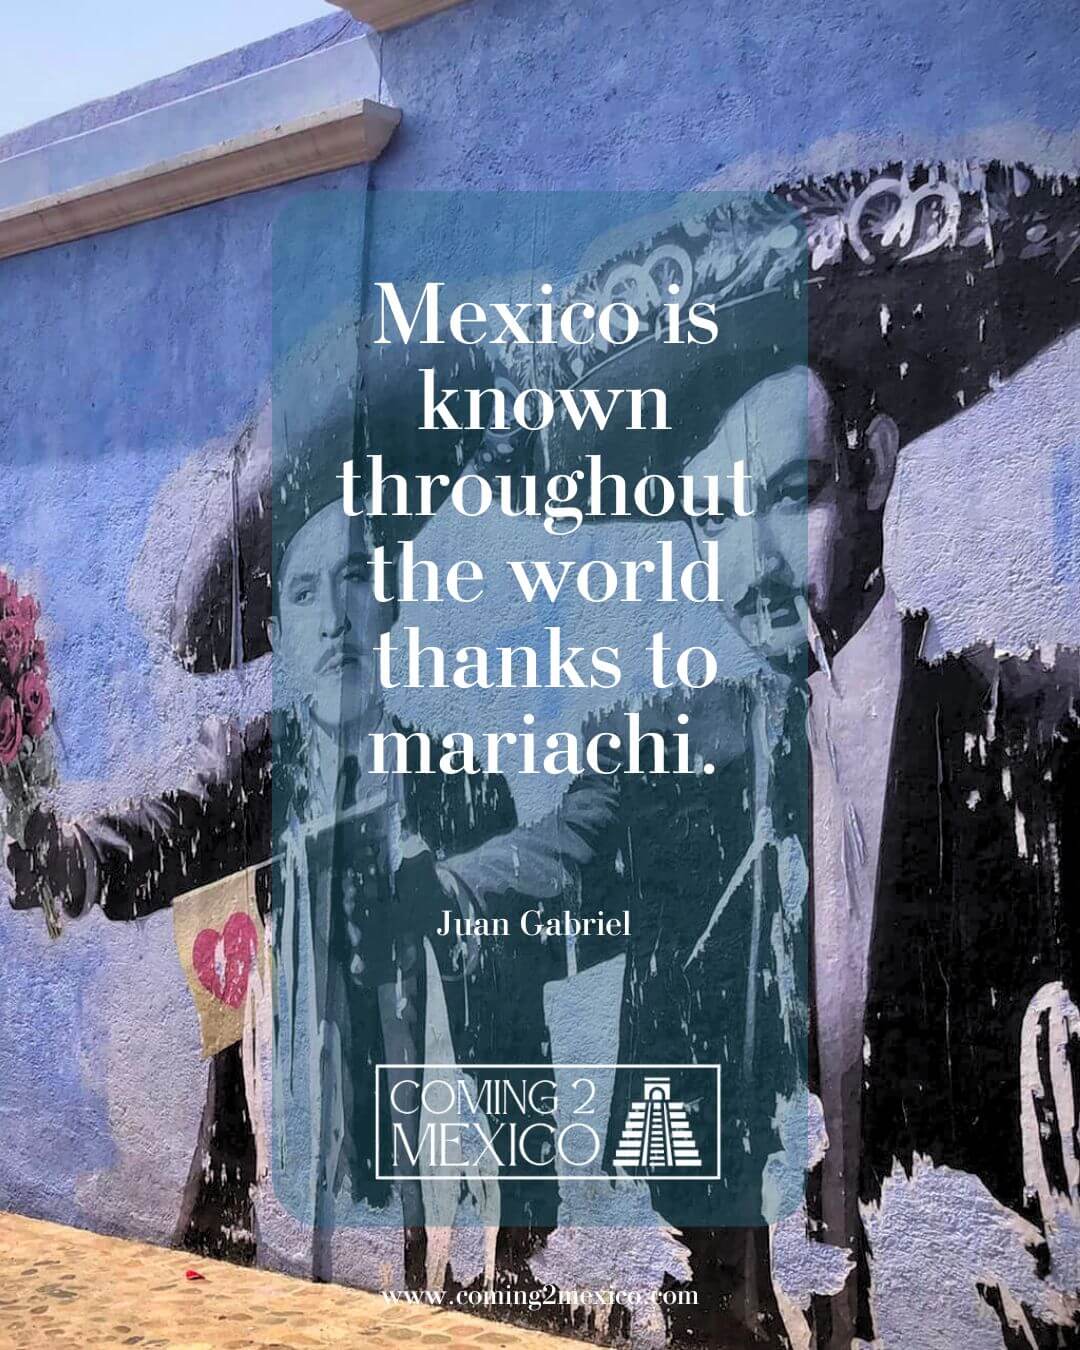 “Mexico is known throughout the world thanks to mariachi.” - Juan Gabriel